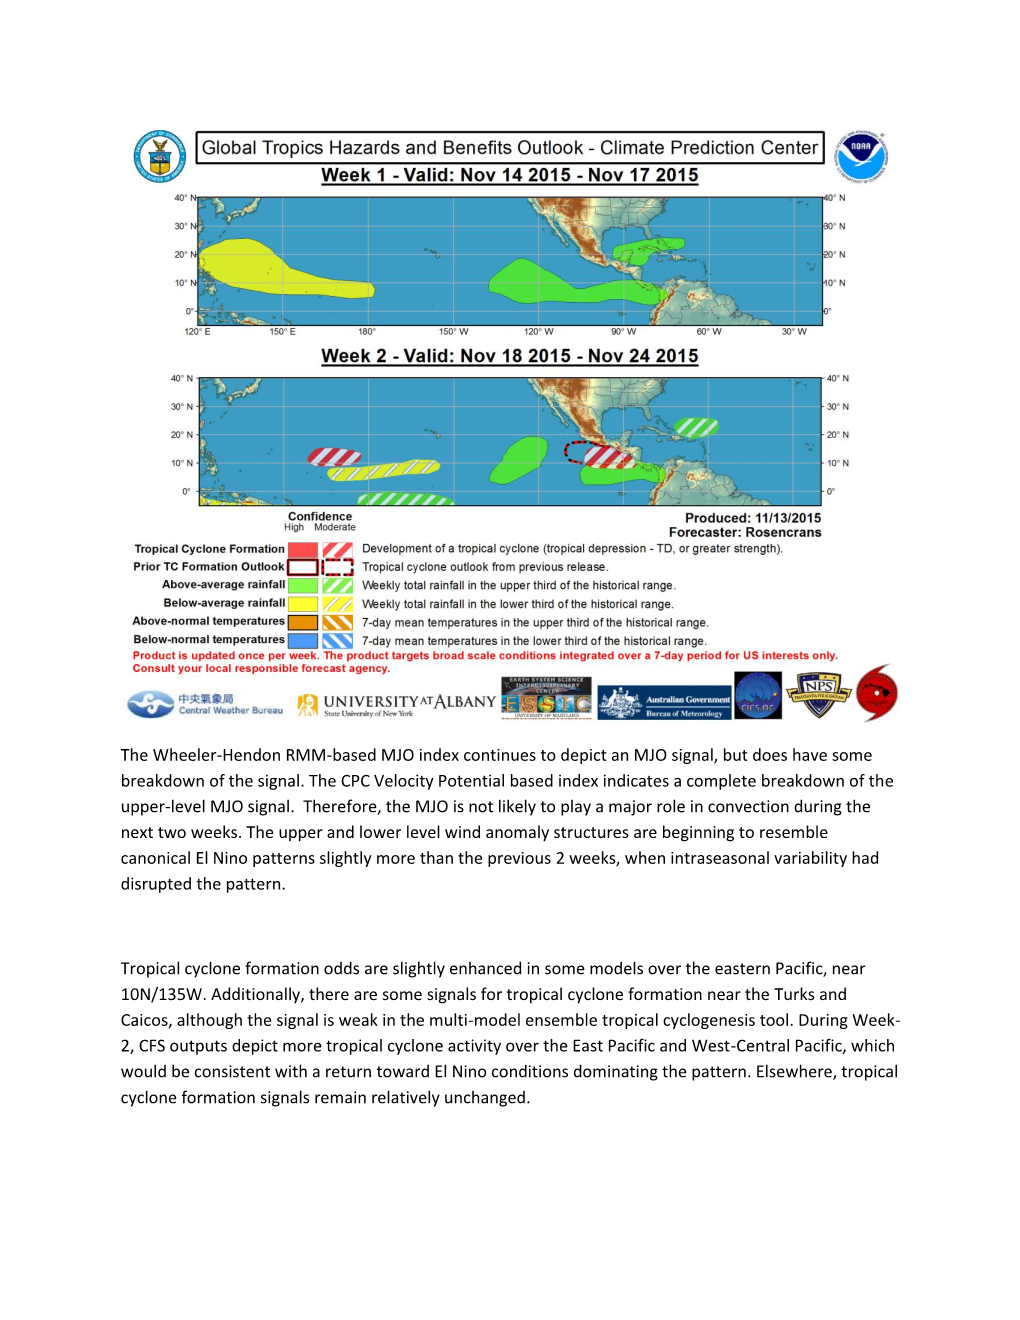 The Wheeler-Hendon RMM-Based MJO Index Continues to Depict an MJO Signal, but Does Have Some Breakdown of the Signal